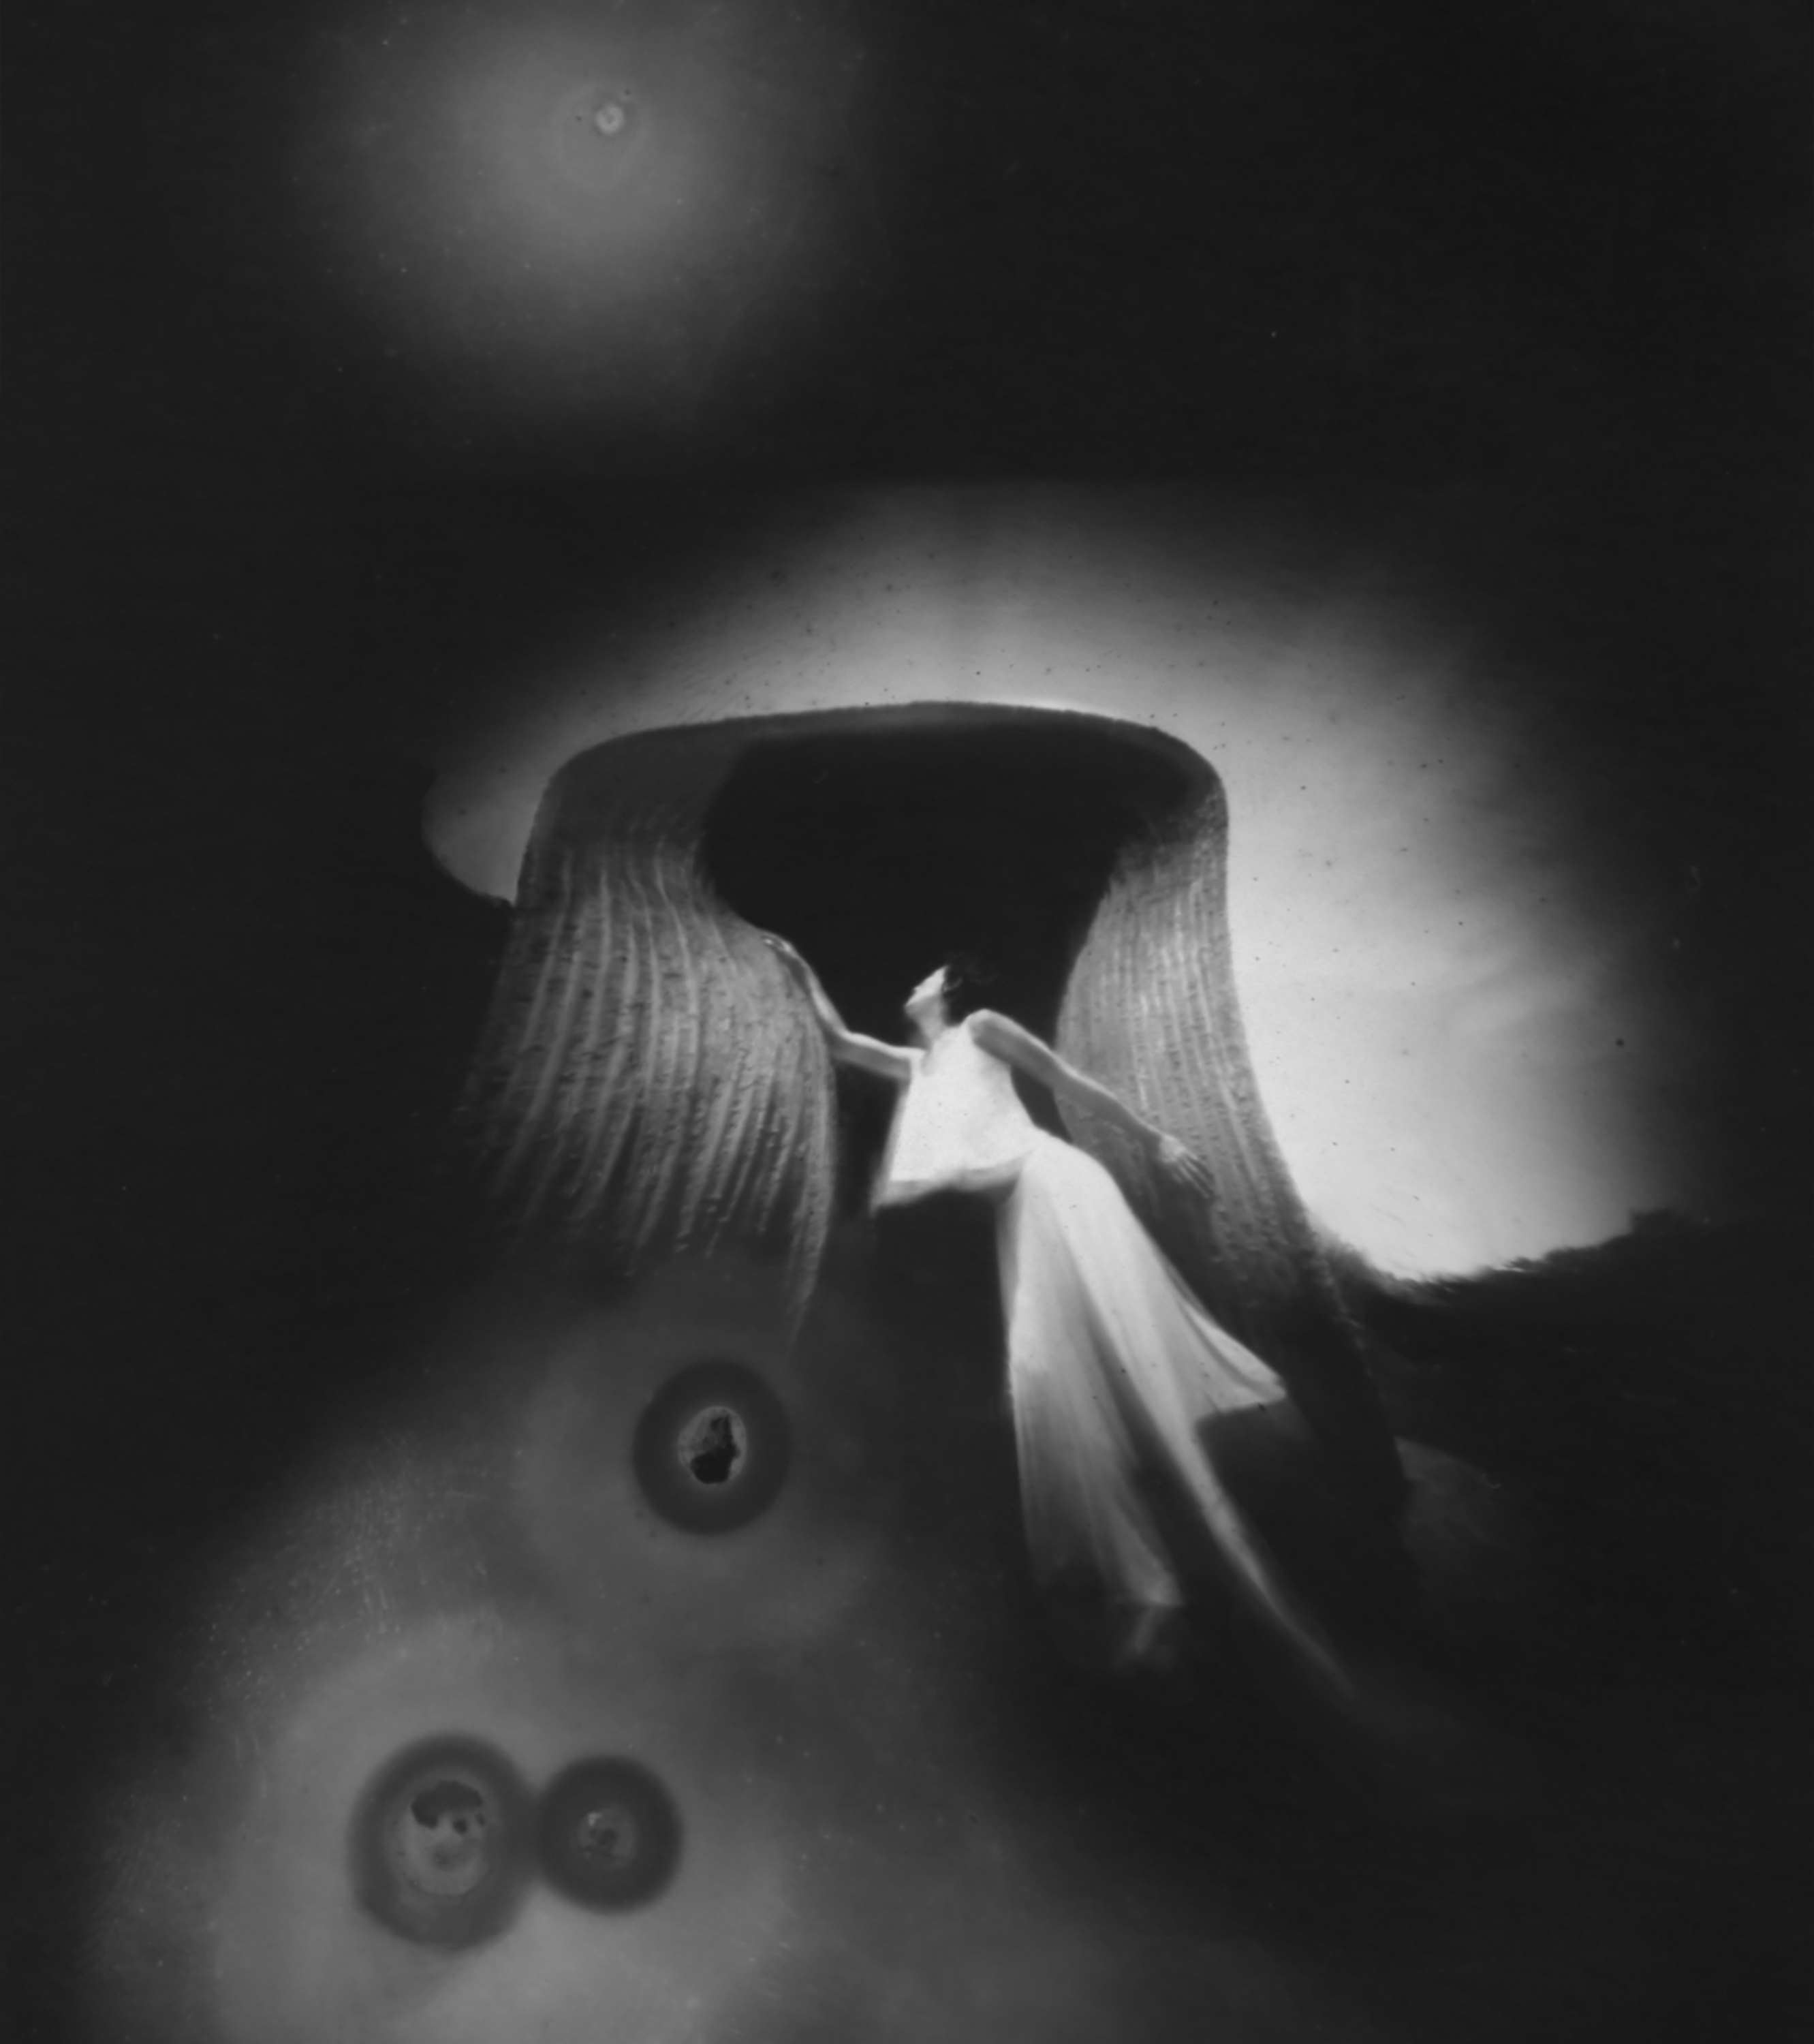 Sharon Harris Makes Surreal Images with Simple Pinhole Cameras